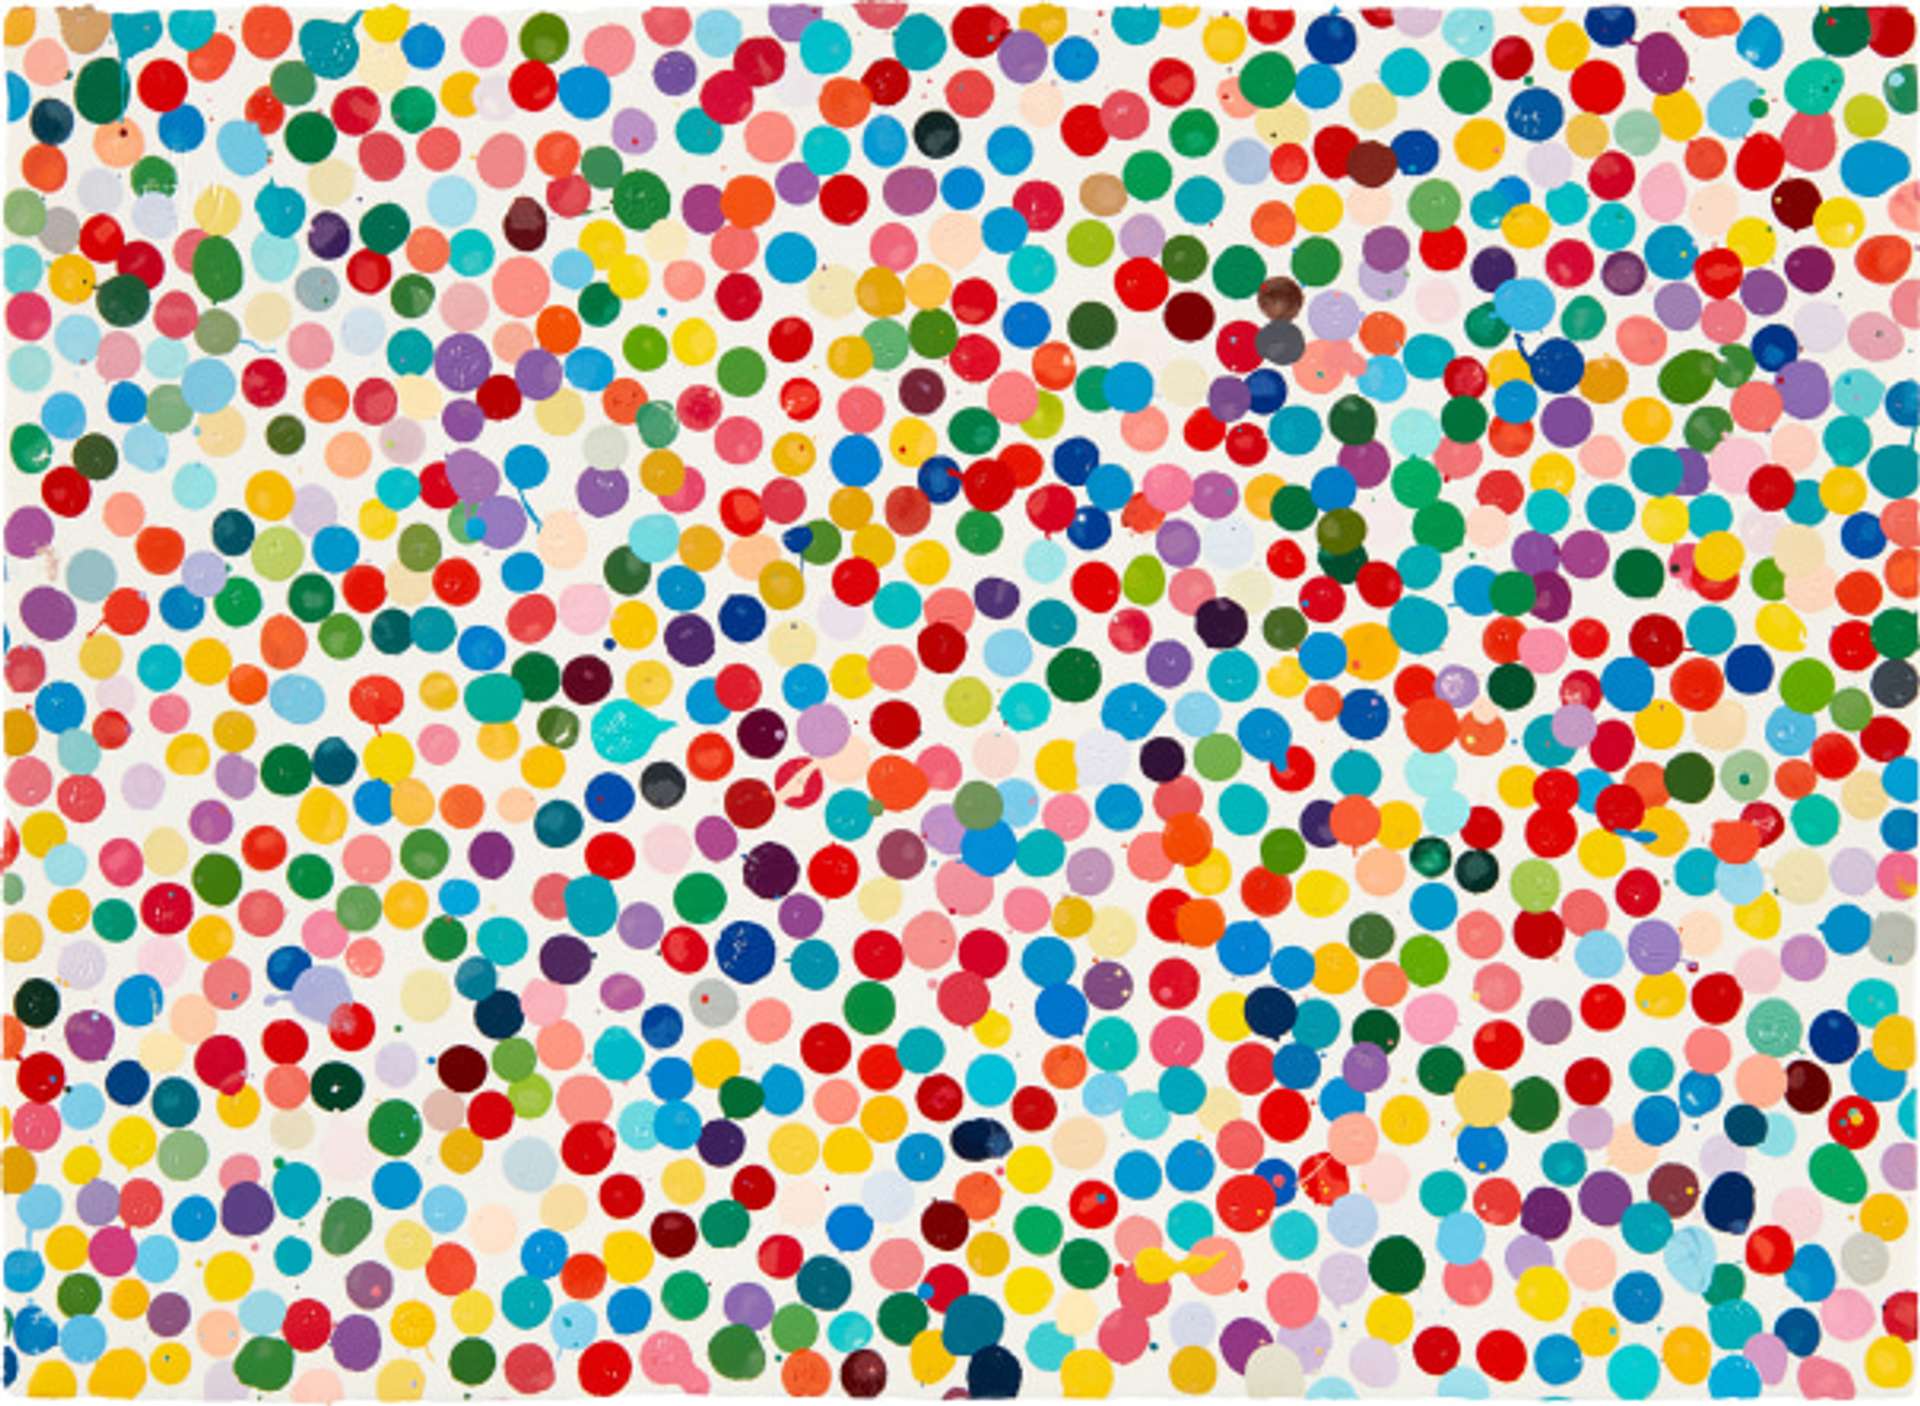 The Currency - Signed Mixed Media by Damien Hirst 2016 - MyArtBroker